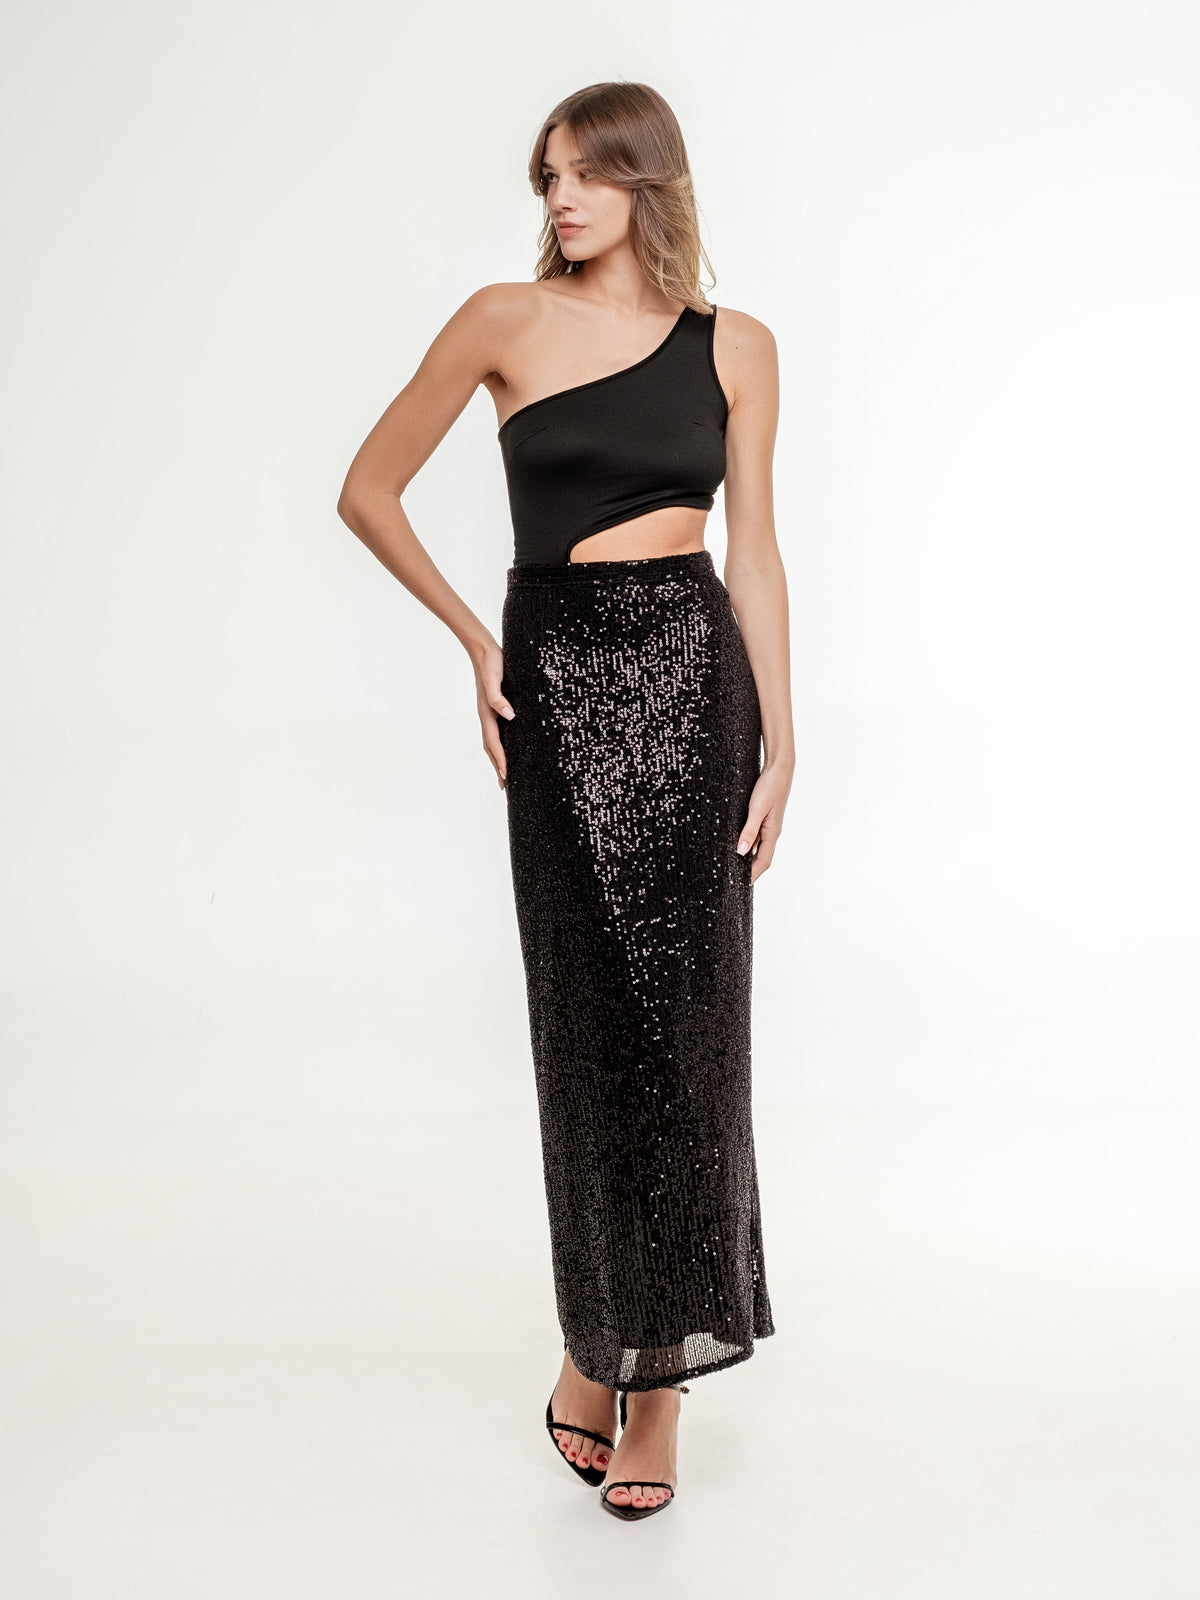 glitter black long skirt view from the front